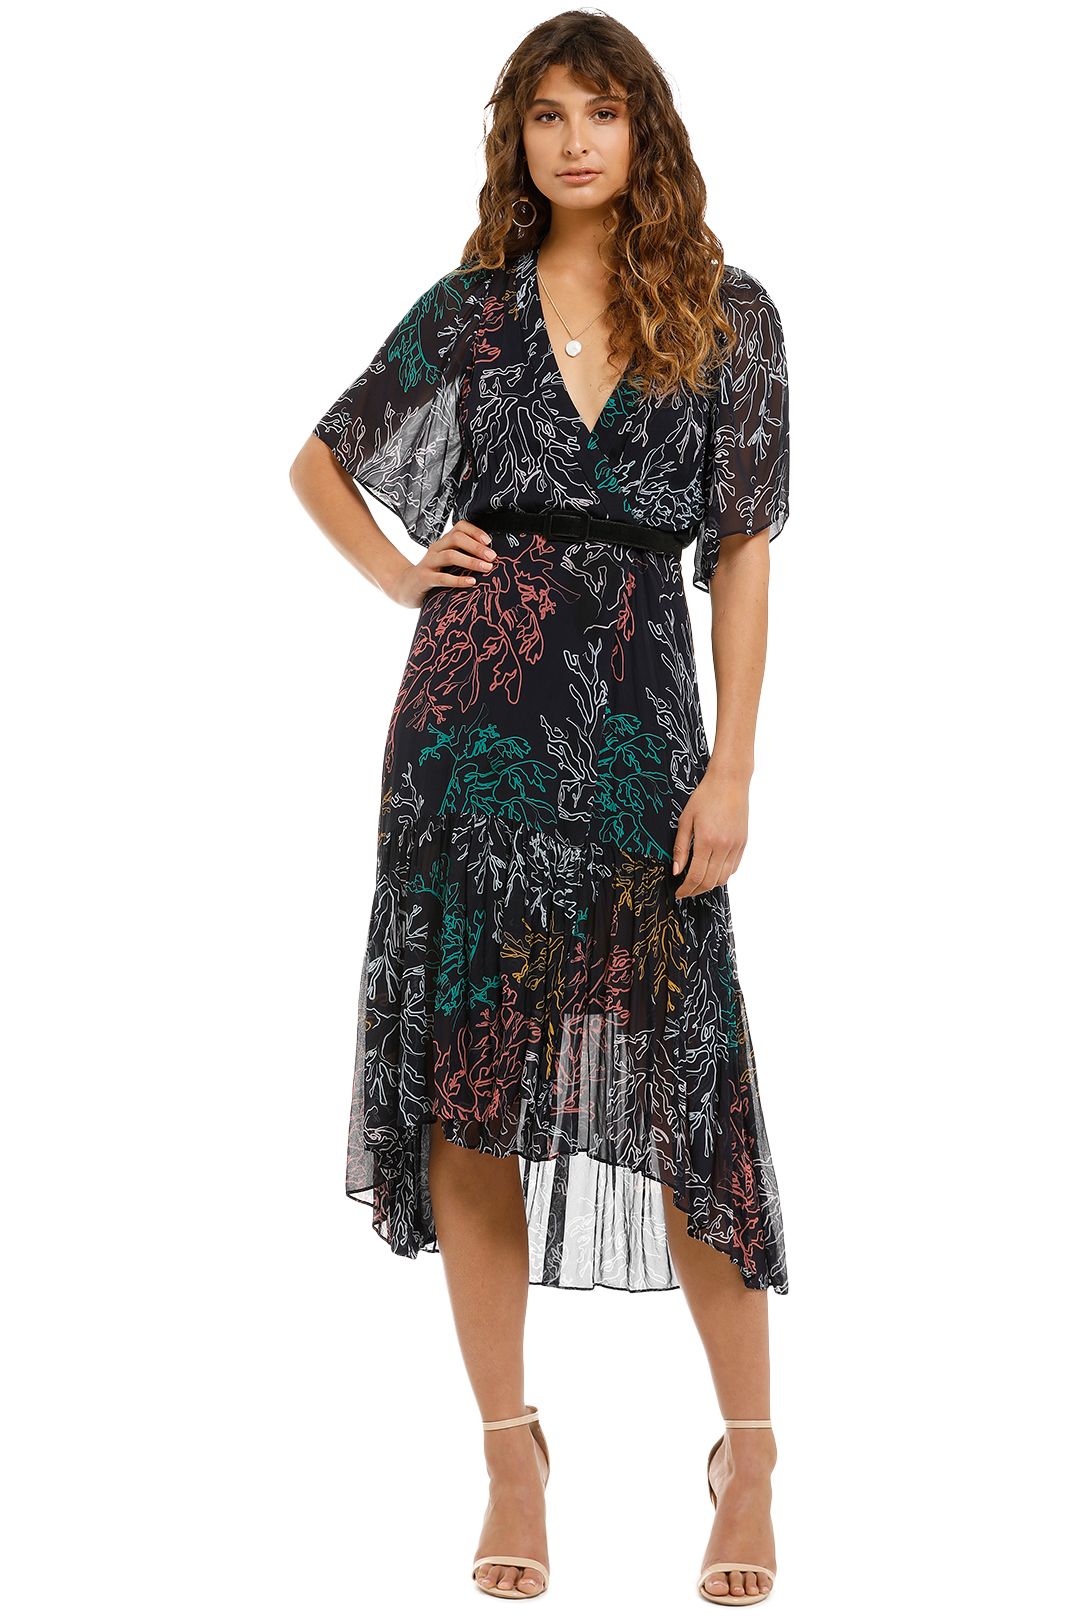 Illustrate Wrap Dress by Ginger & Smart for Rent